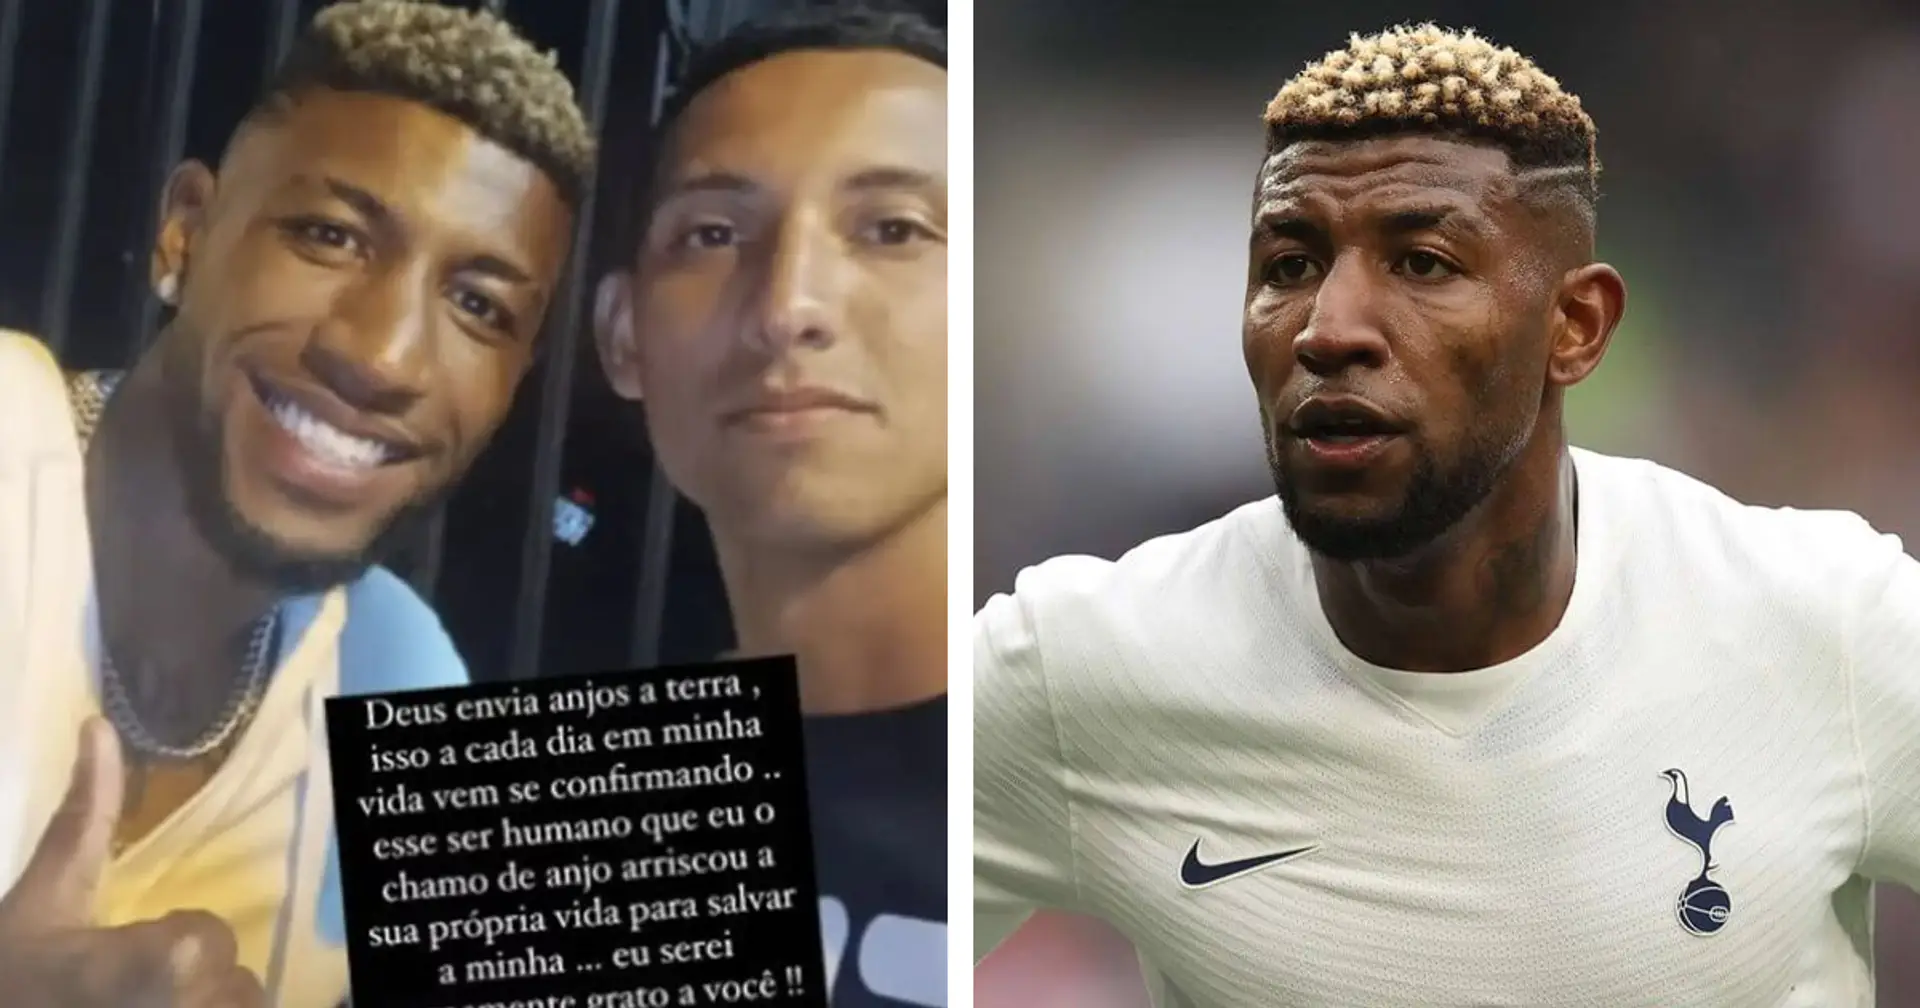 Tottenham defender Emerson barely survives gunfire while leaving party, about ’20 shots’ were fired